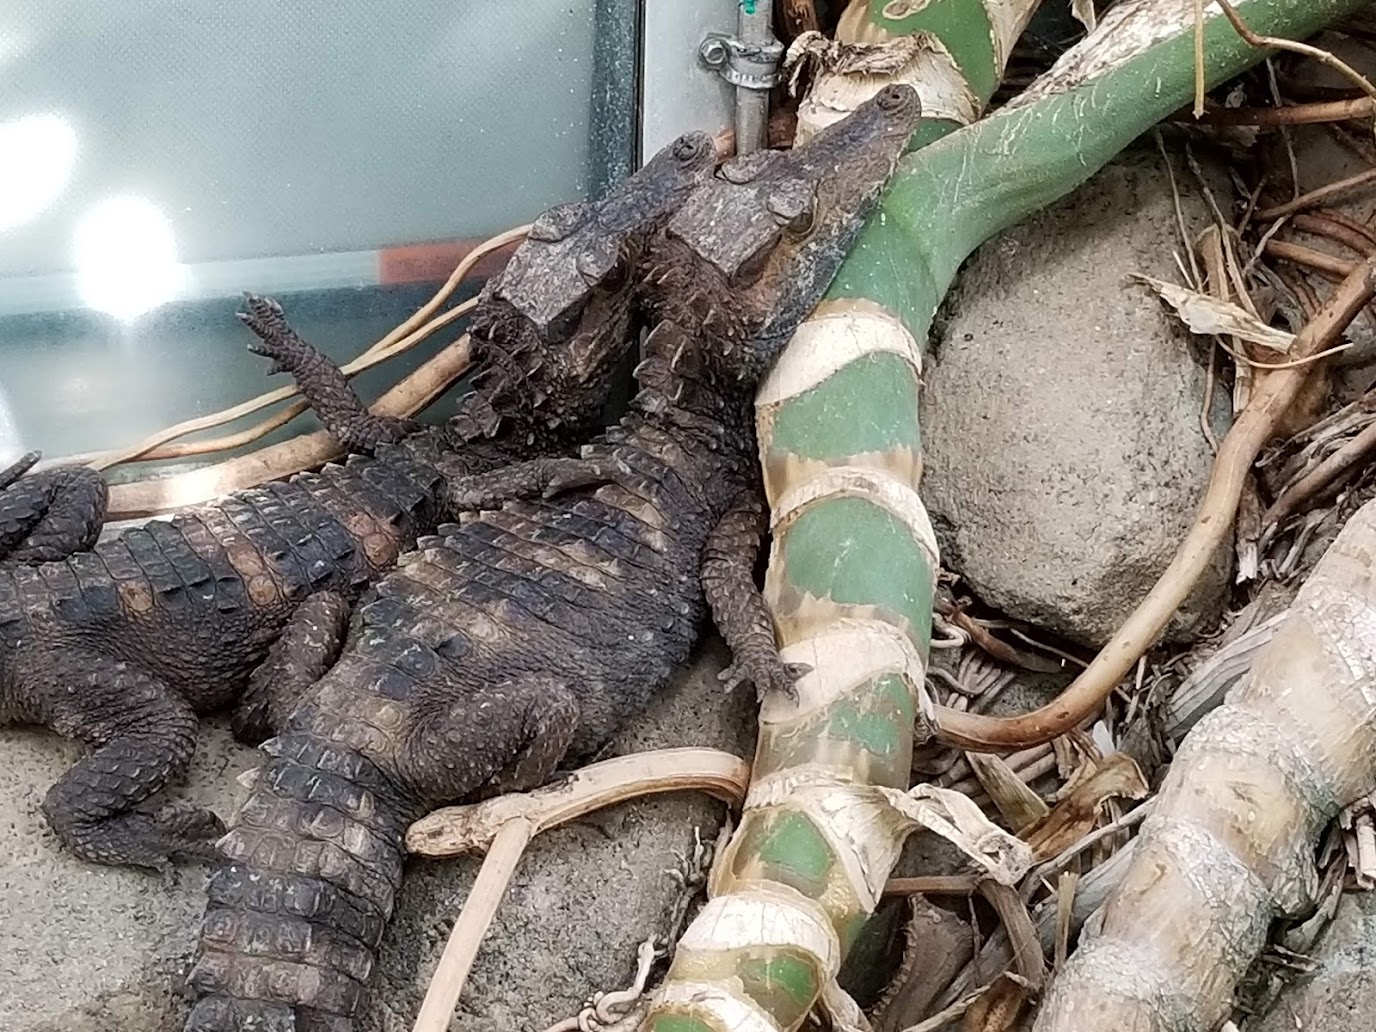 Two caimans laying down next to each other